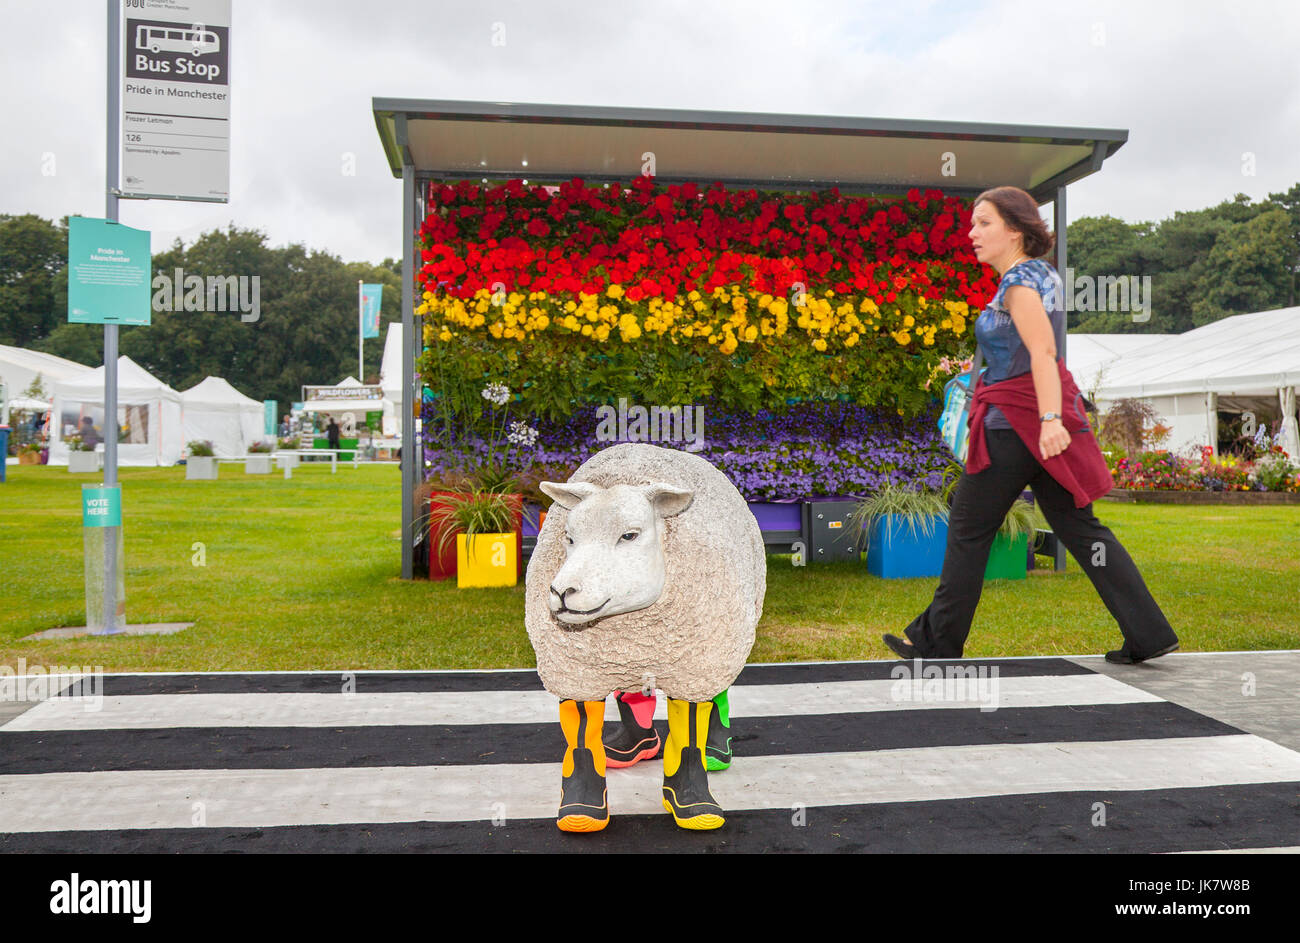 People, animals, flowers & plants growing in decorated garden Bus shelters, bus stop, waiting shelters, adapted for Floral displays; The Boulevard at the RHS Flower Show Tatton Park,, Knutsford, Cheshire, UK Stock Photo